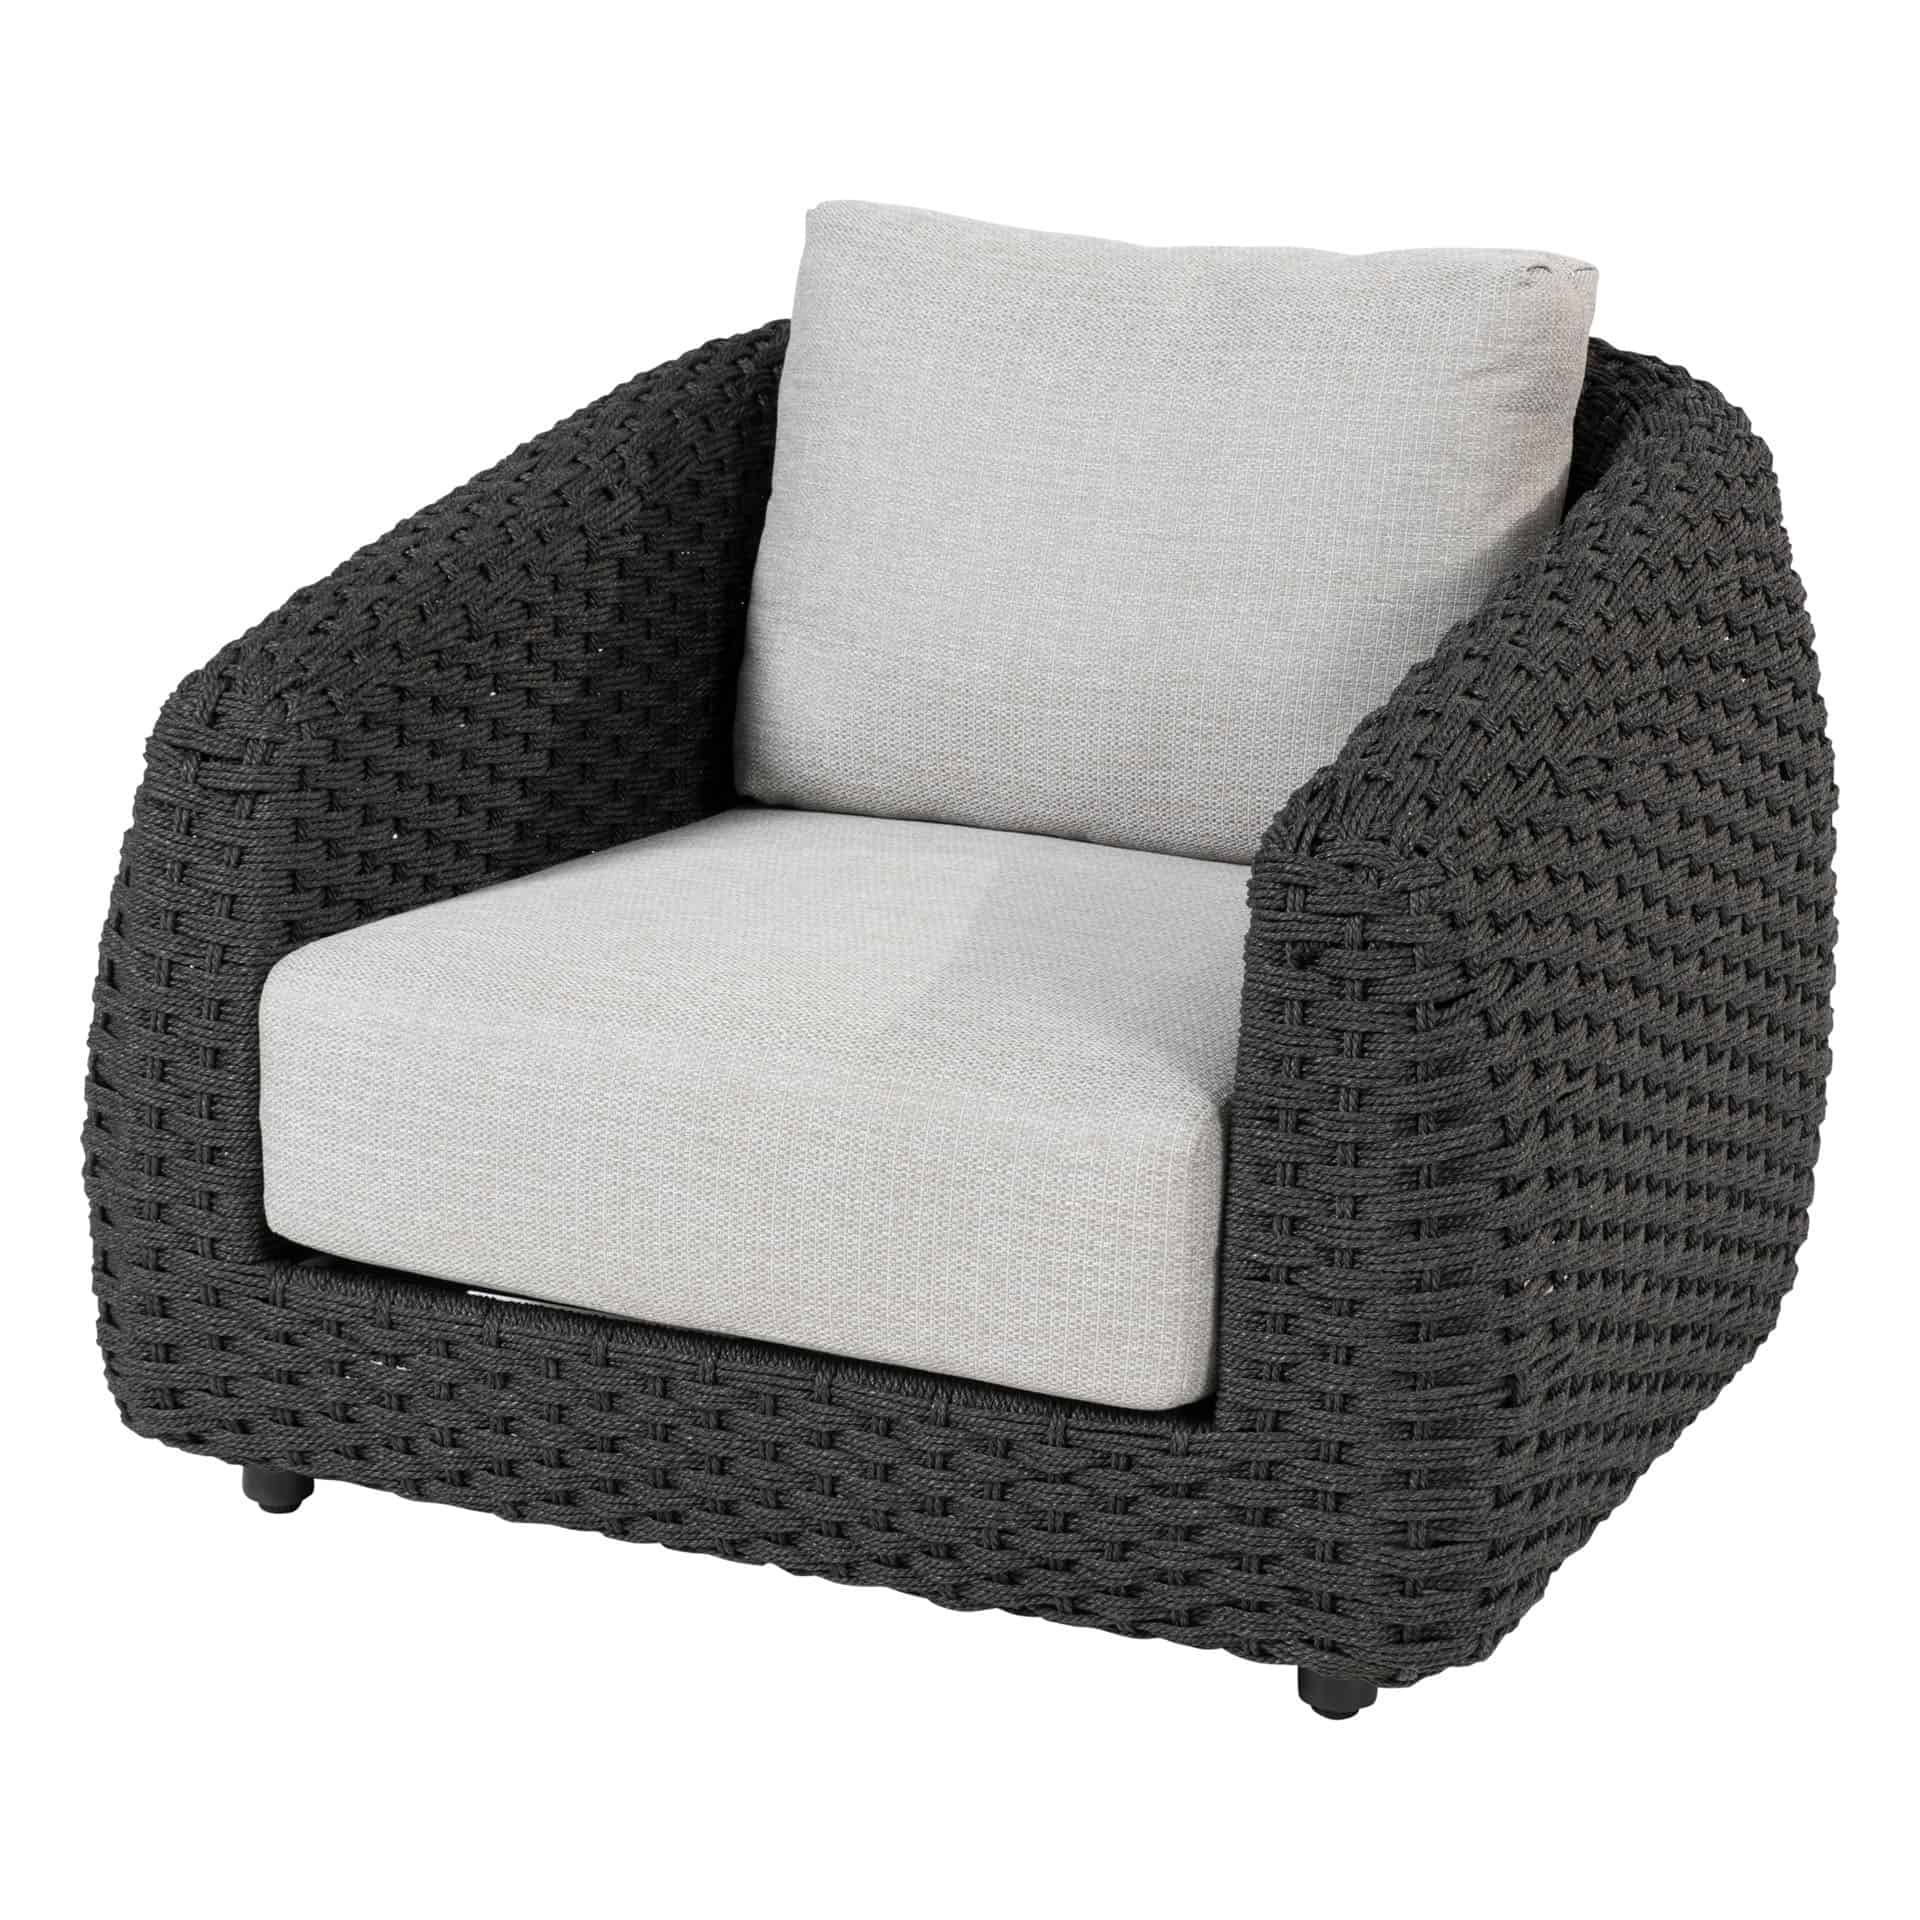 213948_-Saint-Tropez-living-chair-anthracite-with-2-cushions-01